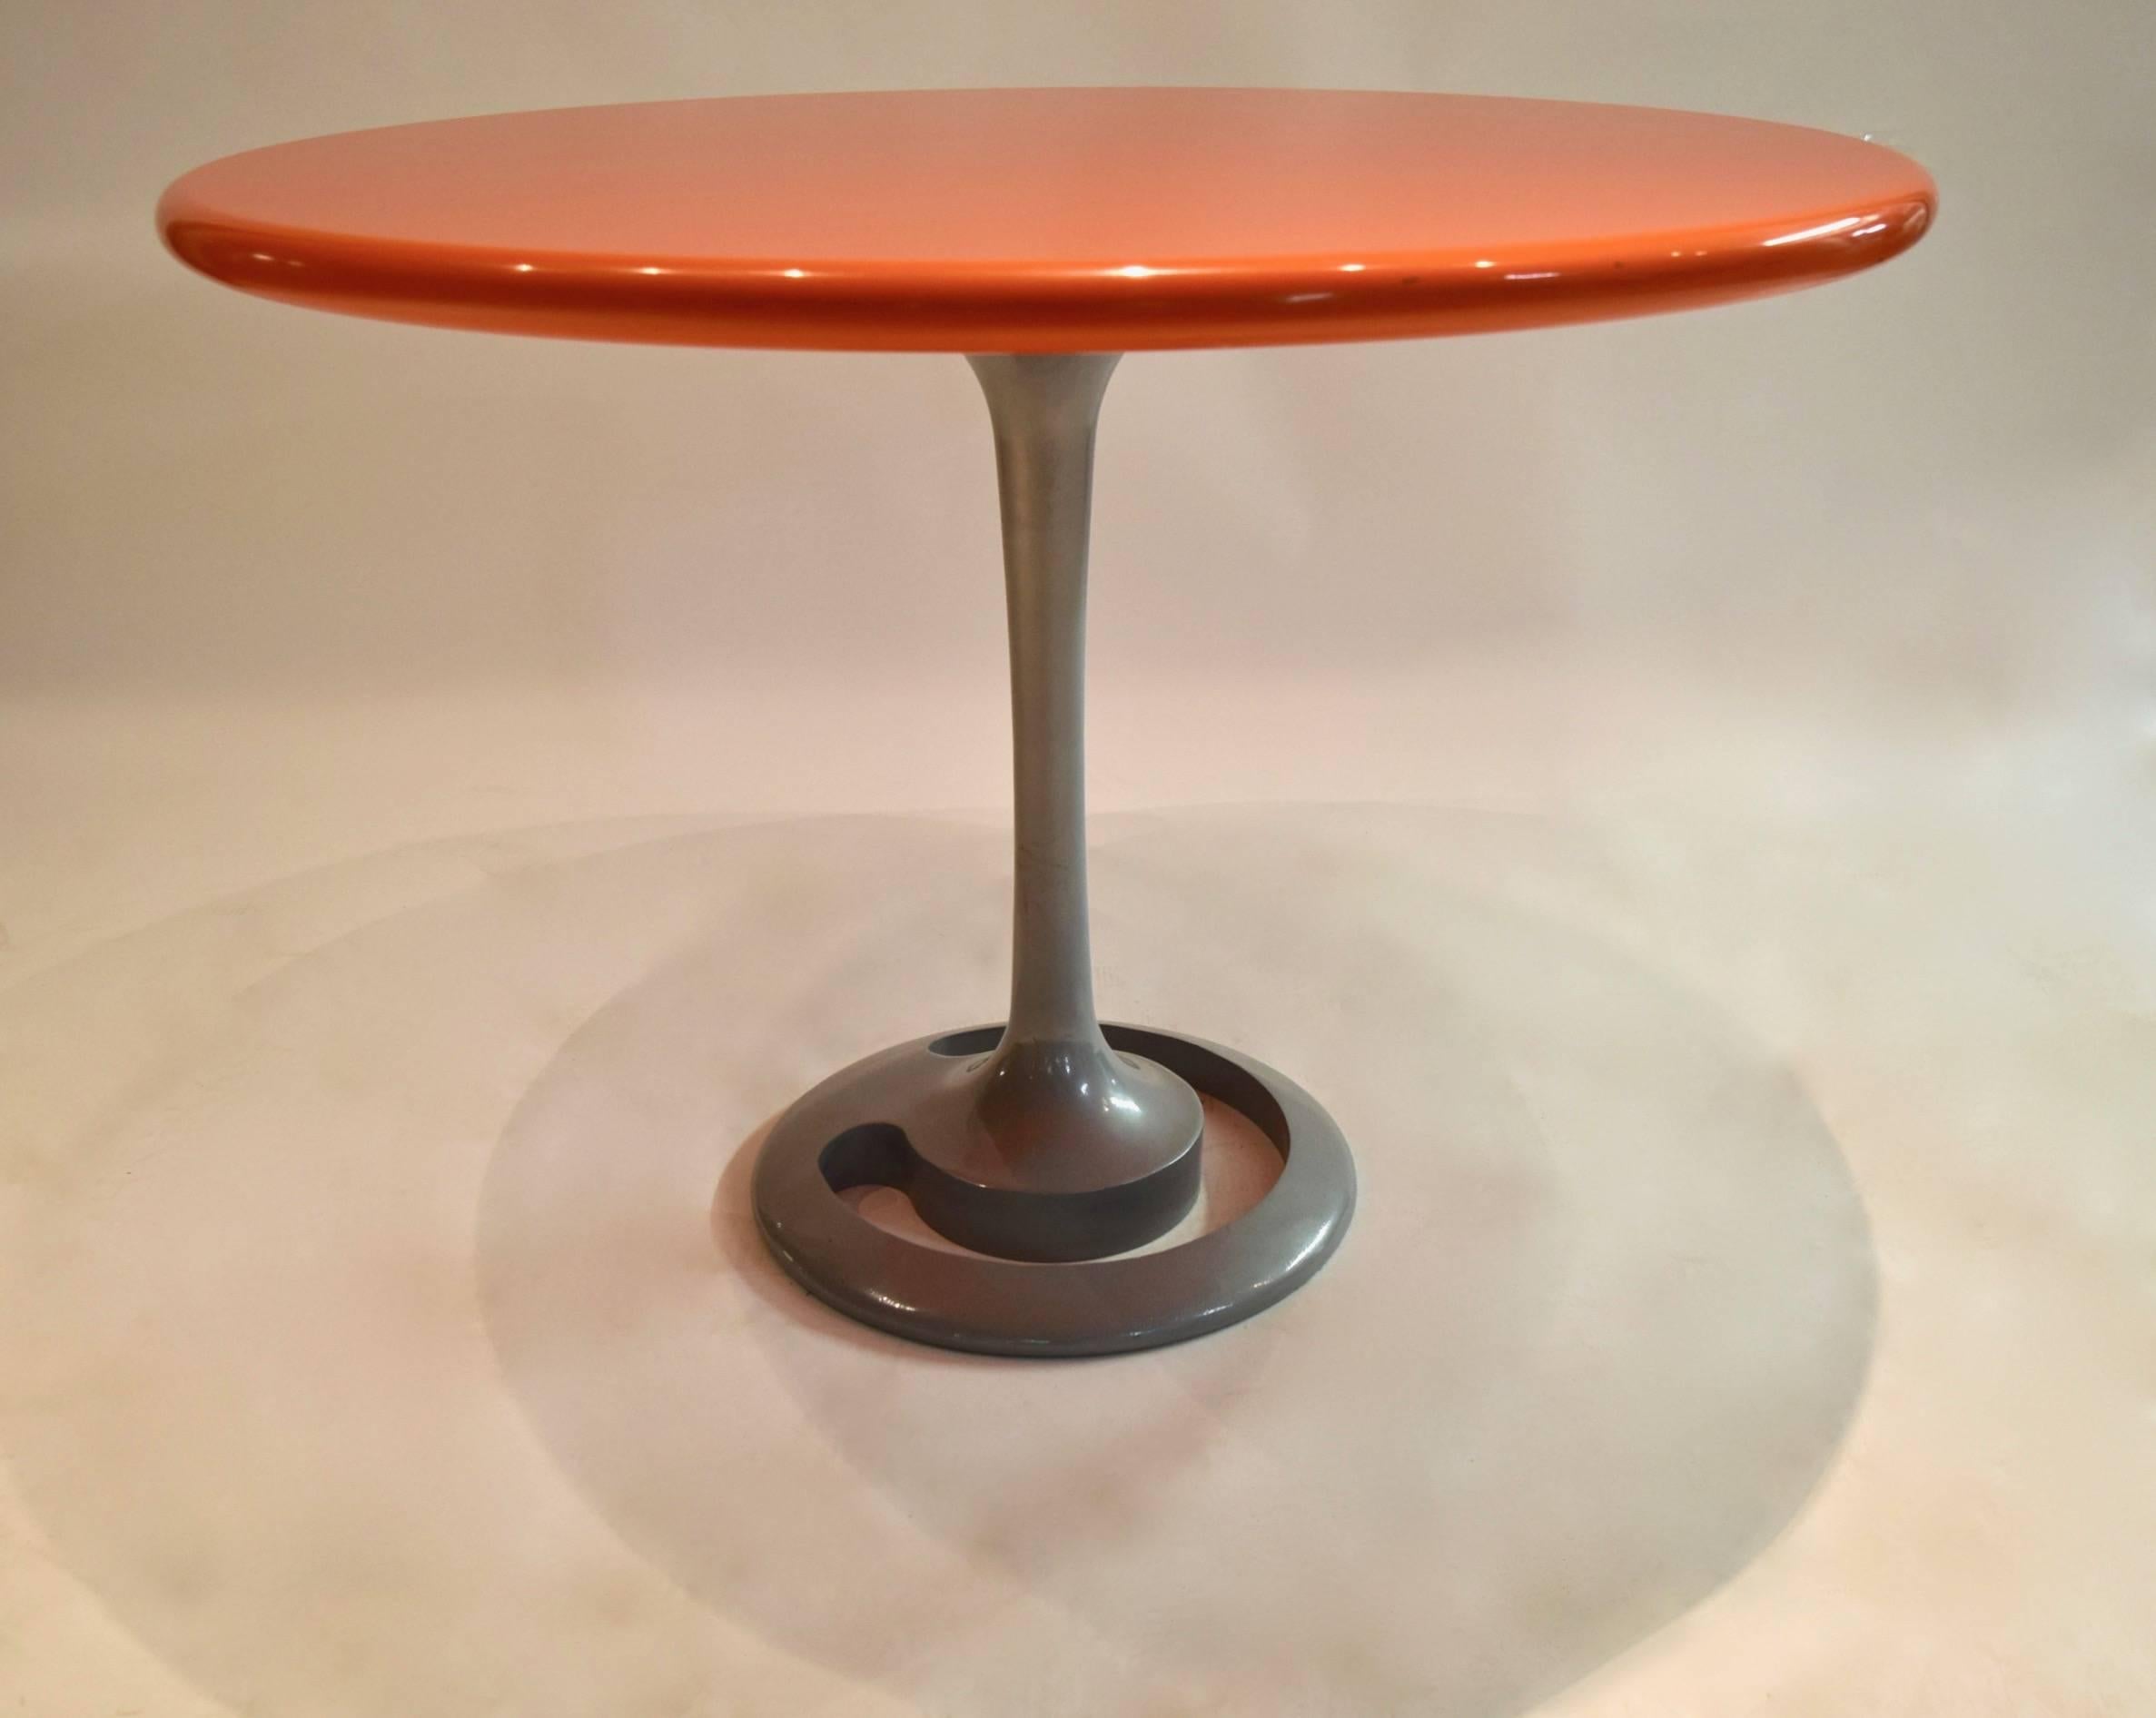 Original, round Komed dining table designed by Marc Newson and made for the restaurant 'Canteen' of New York City that opened in 1999. The table comprises a rounded edged top of thick, orange gloss lacquered wood and a gray-finished cast aluminium